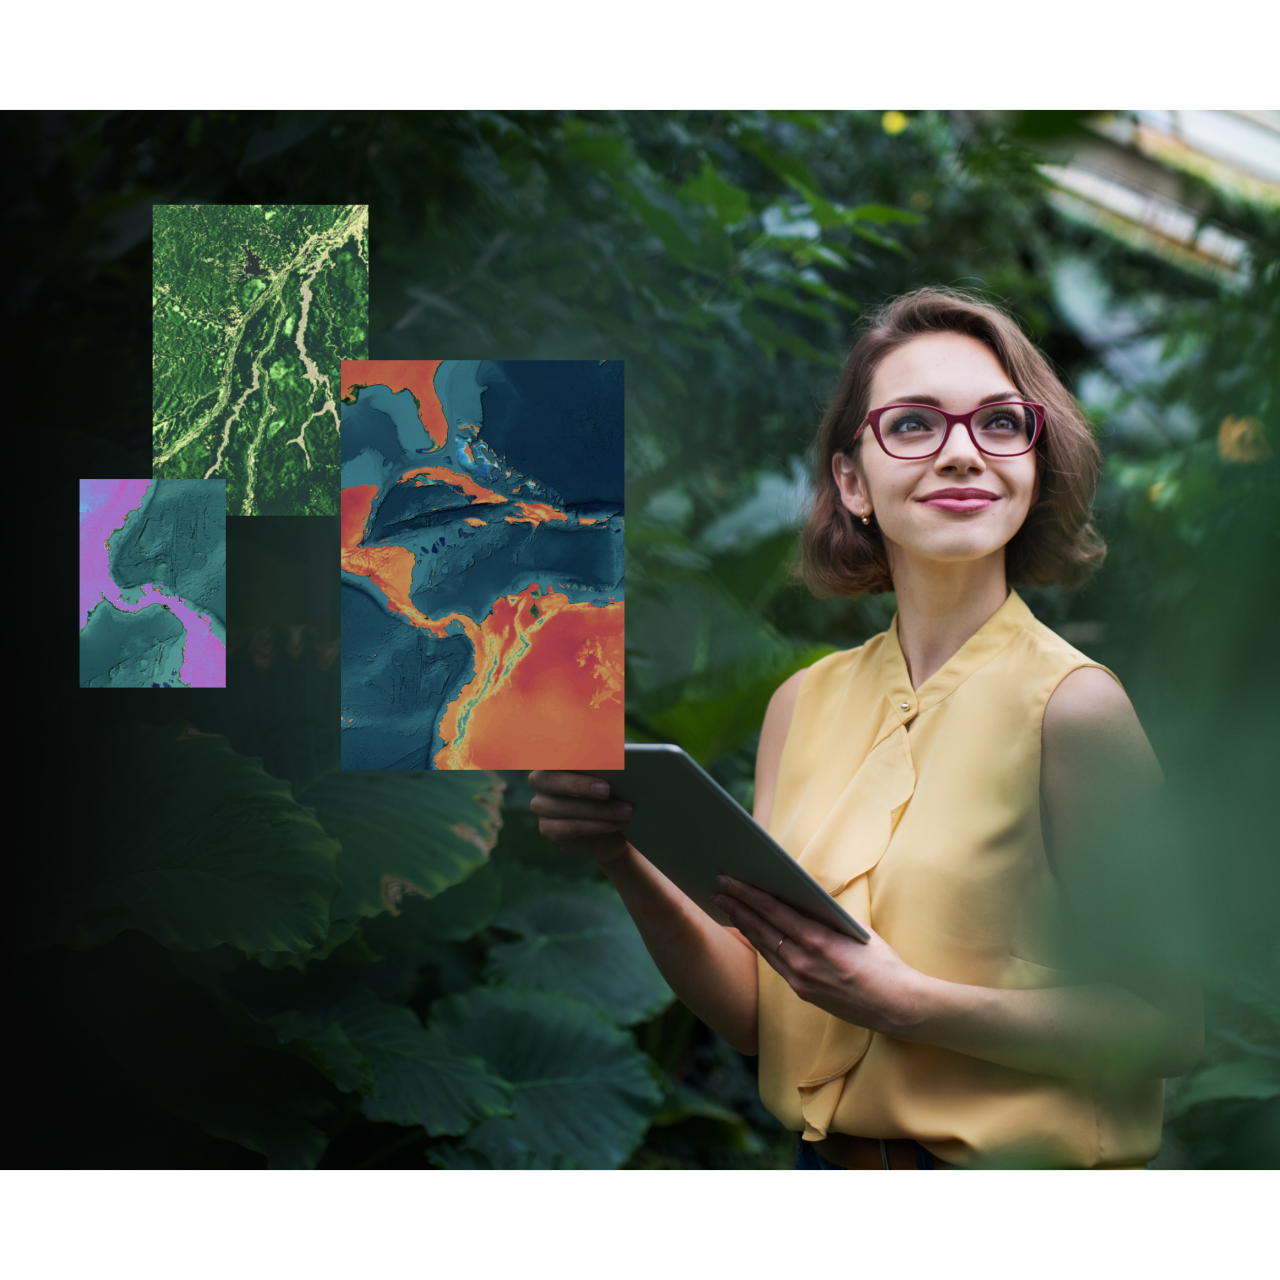 A young woman wearing glasses and a yellow shirt is holding a tablet while standing against a backdrop of trees, looking out into the distance. Alongside are colorful maps indicating what is on her tablet. 